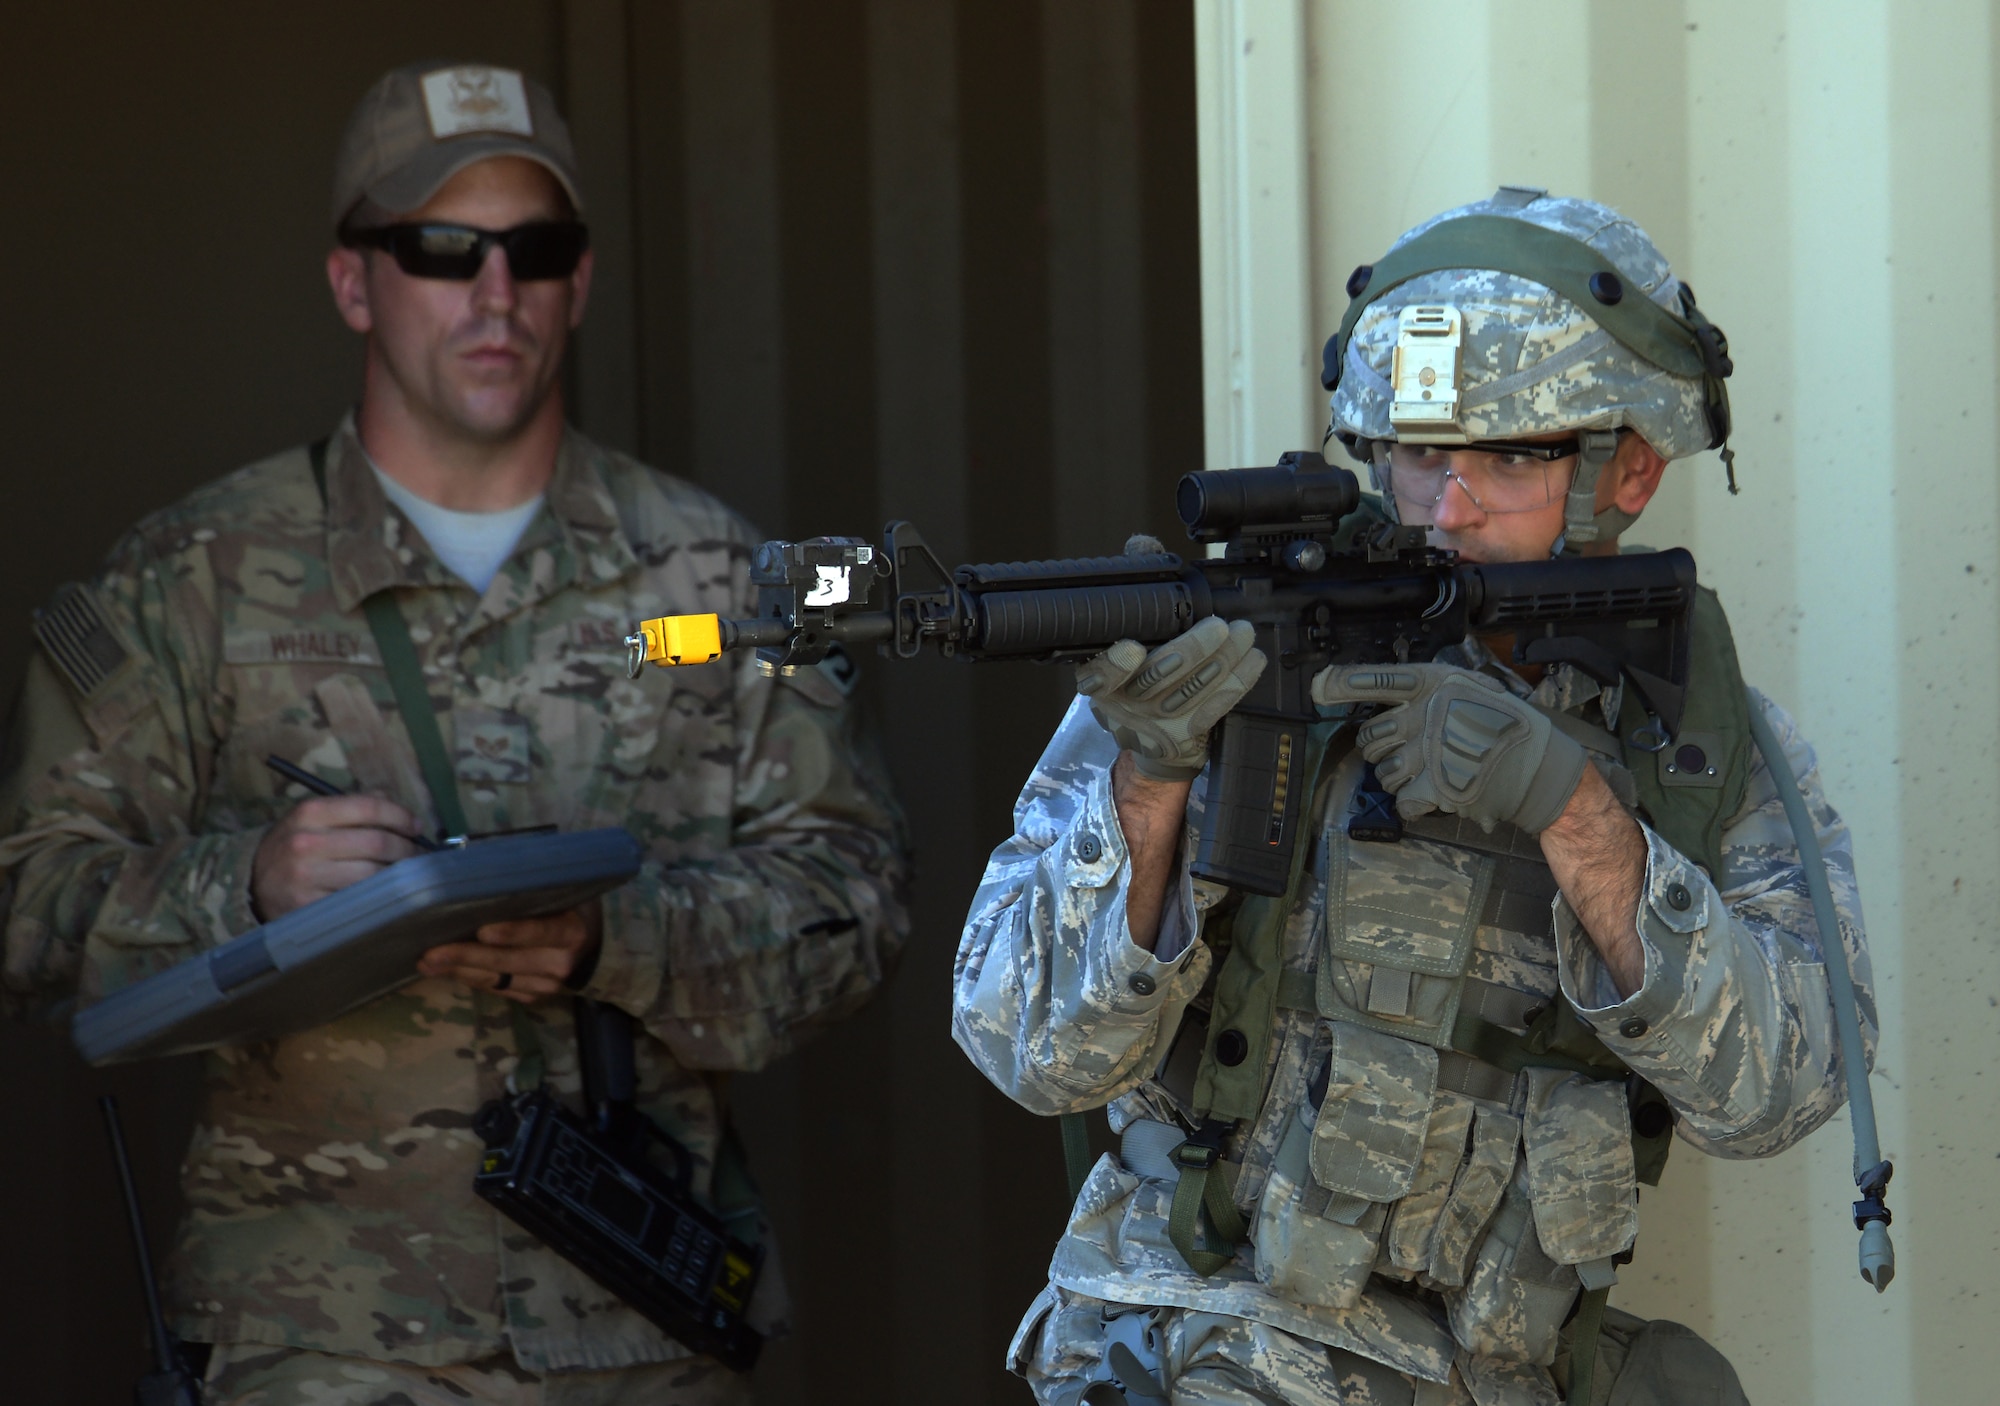 Staff Sgt. James Finley, 7th Bomb Wing, Dyess Air Force Base, Texas, scans an area while Staff Sgt. Steven Whaley, 620th Ground Combat Training Squadron instructor, Camp Guernsey, Wyo., evaluates his tactics during the tactical recapture portion of the 2015 Global Strike Challenge security forces competition on Camp Guernsey, Wyo., Sept. 24, 2015. Teams were evaluated on their tactics including use of cover, building clearing procedures and team communication. (U.S. Air Force photo by Senior Airman Brandon Valle) 